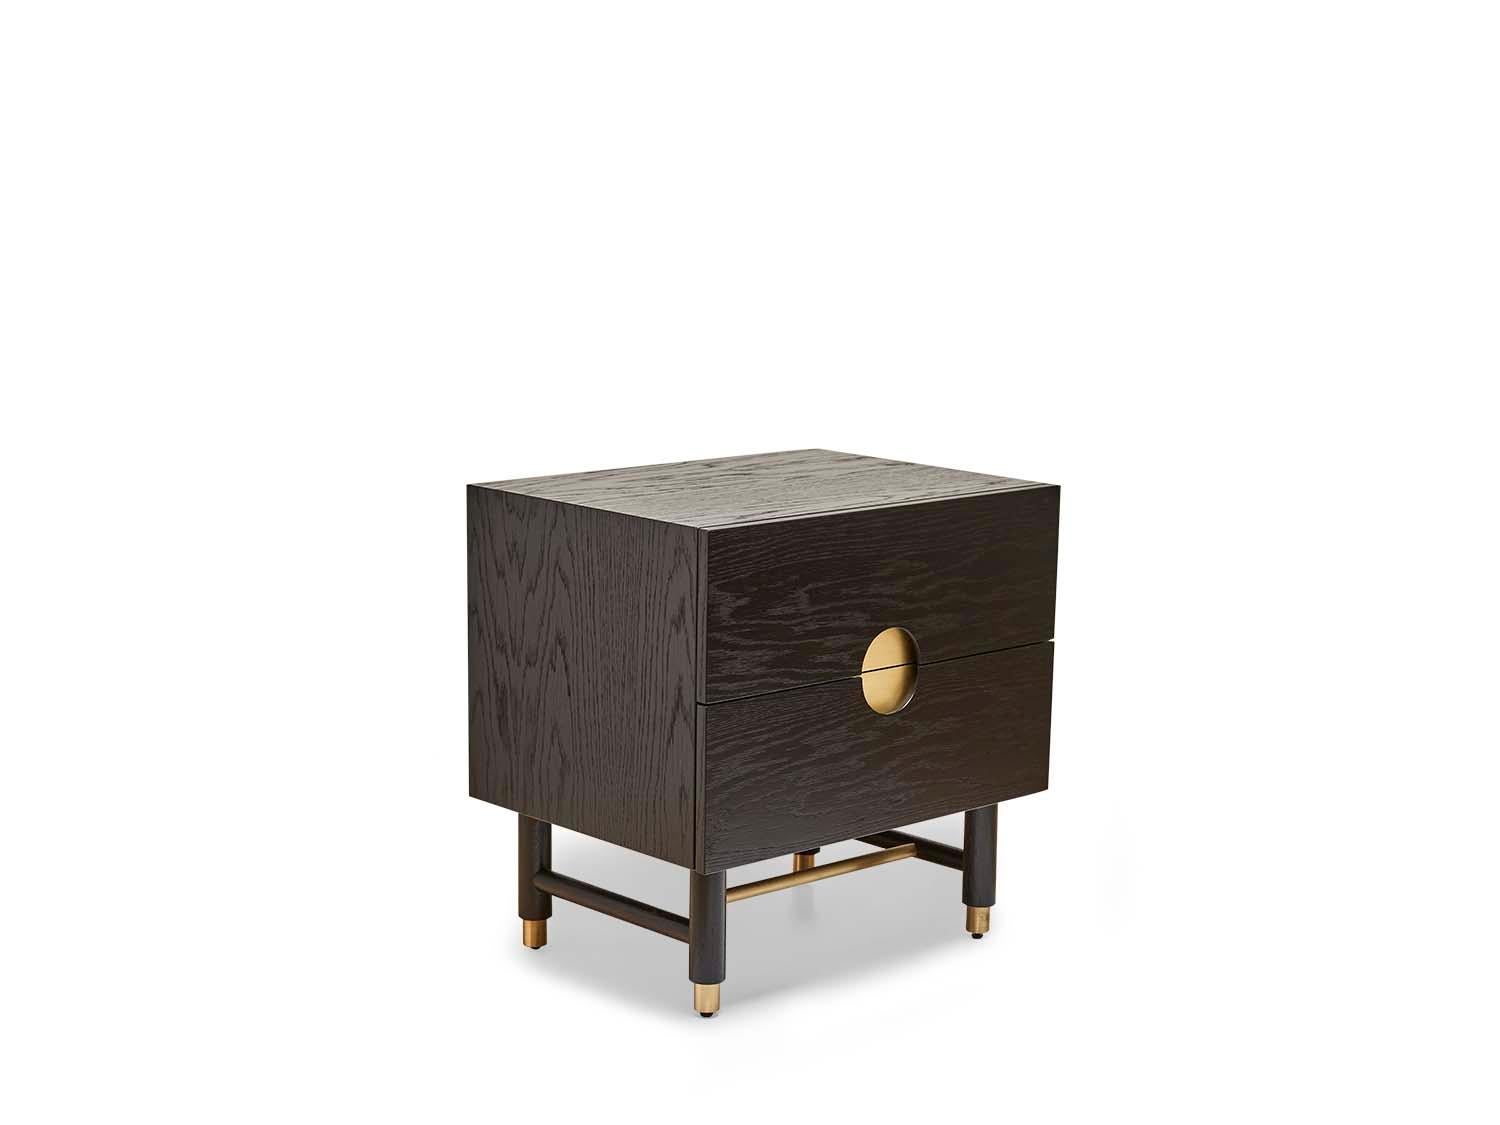 The Niguel Nightstand features two drawers. Details include leveling brass cap feet, a brass stretcher on the base, lacquered interior and inset brass hardware. Shown here in ebonized oak.

The Lawson-Fenning Collection is designed and handmade in